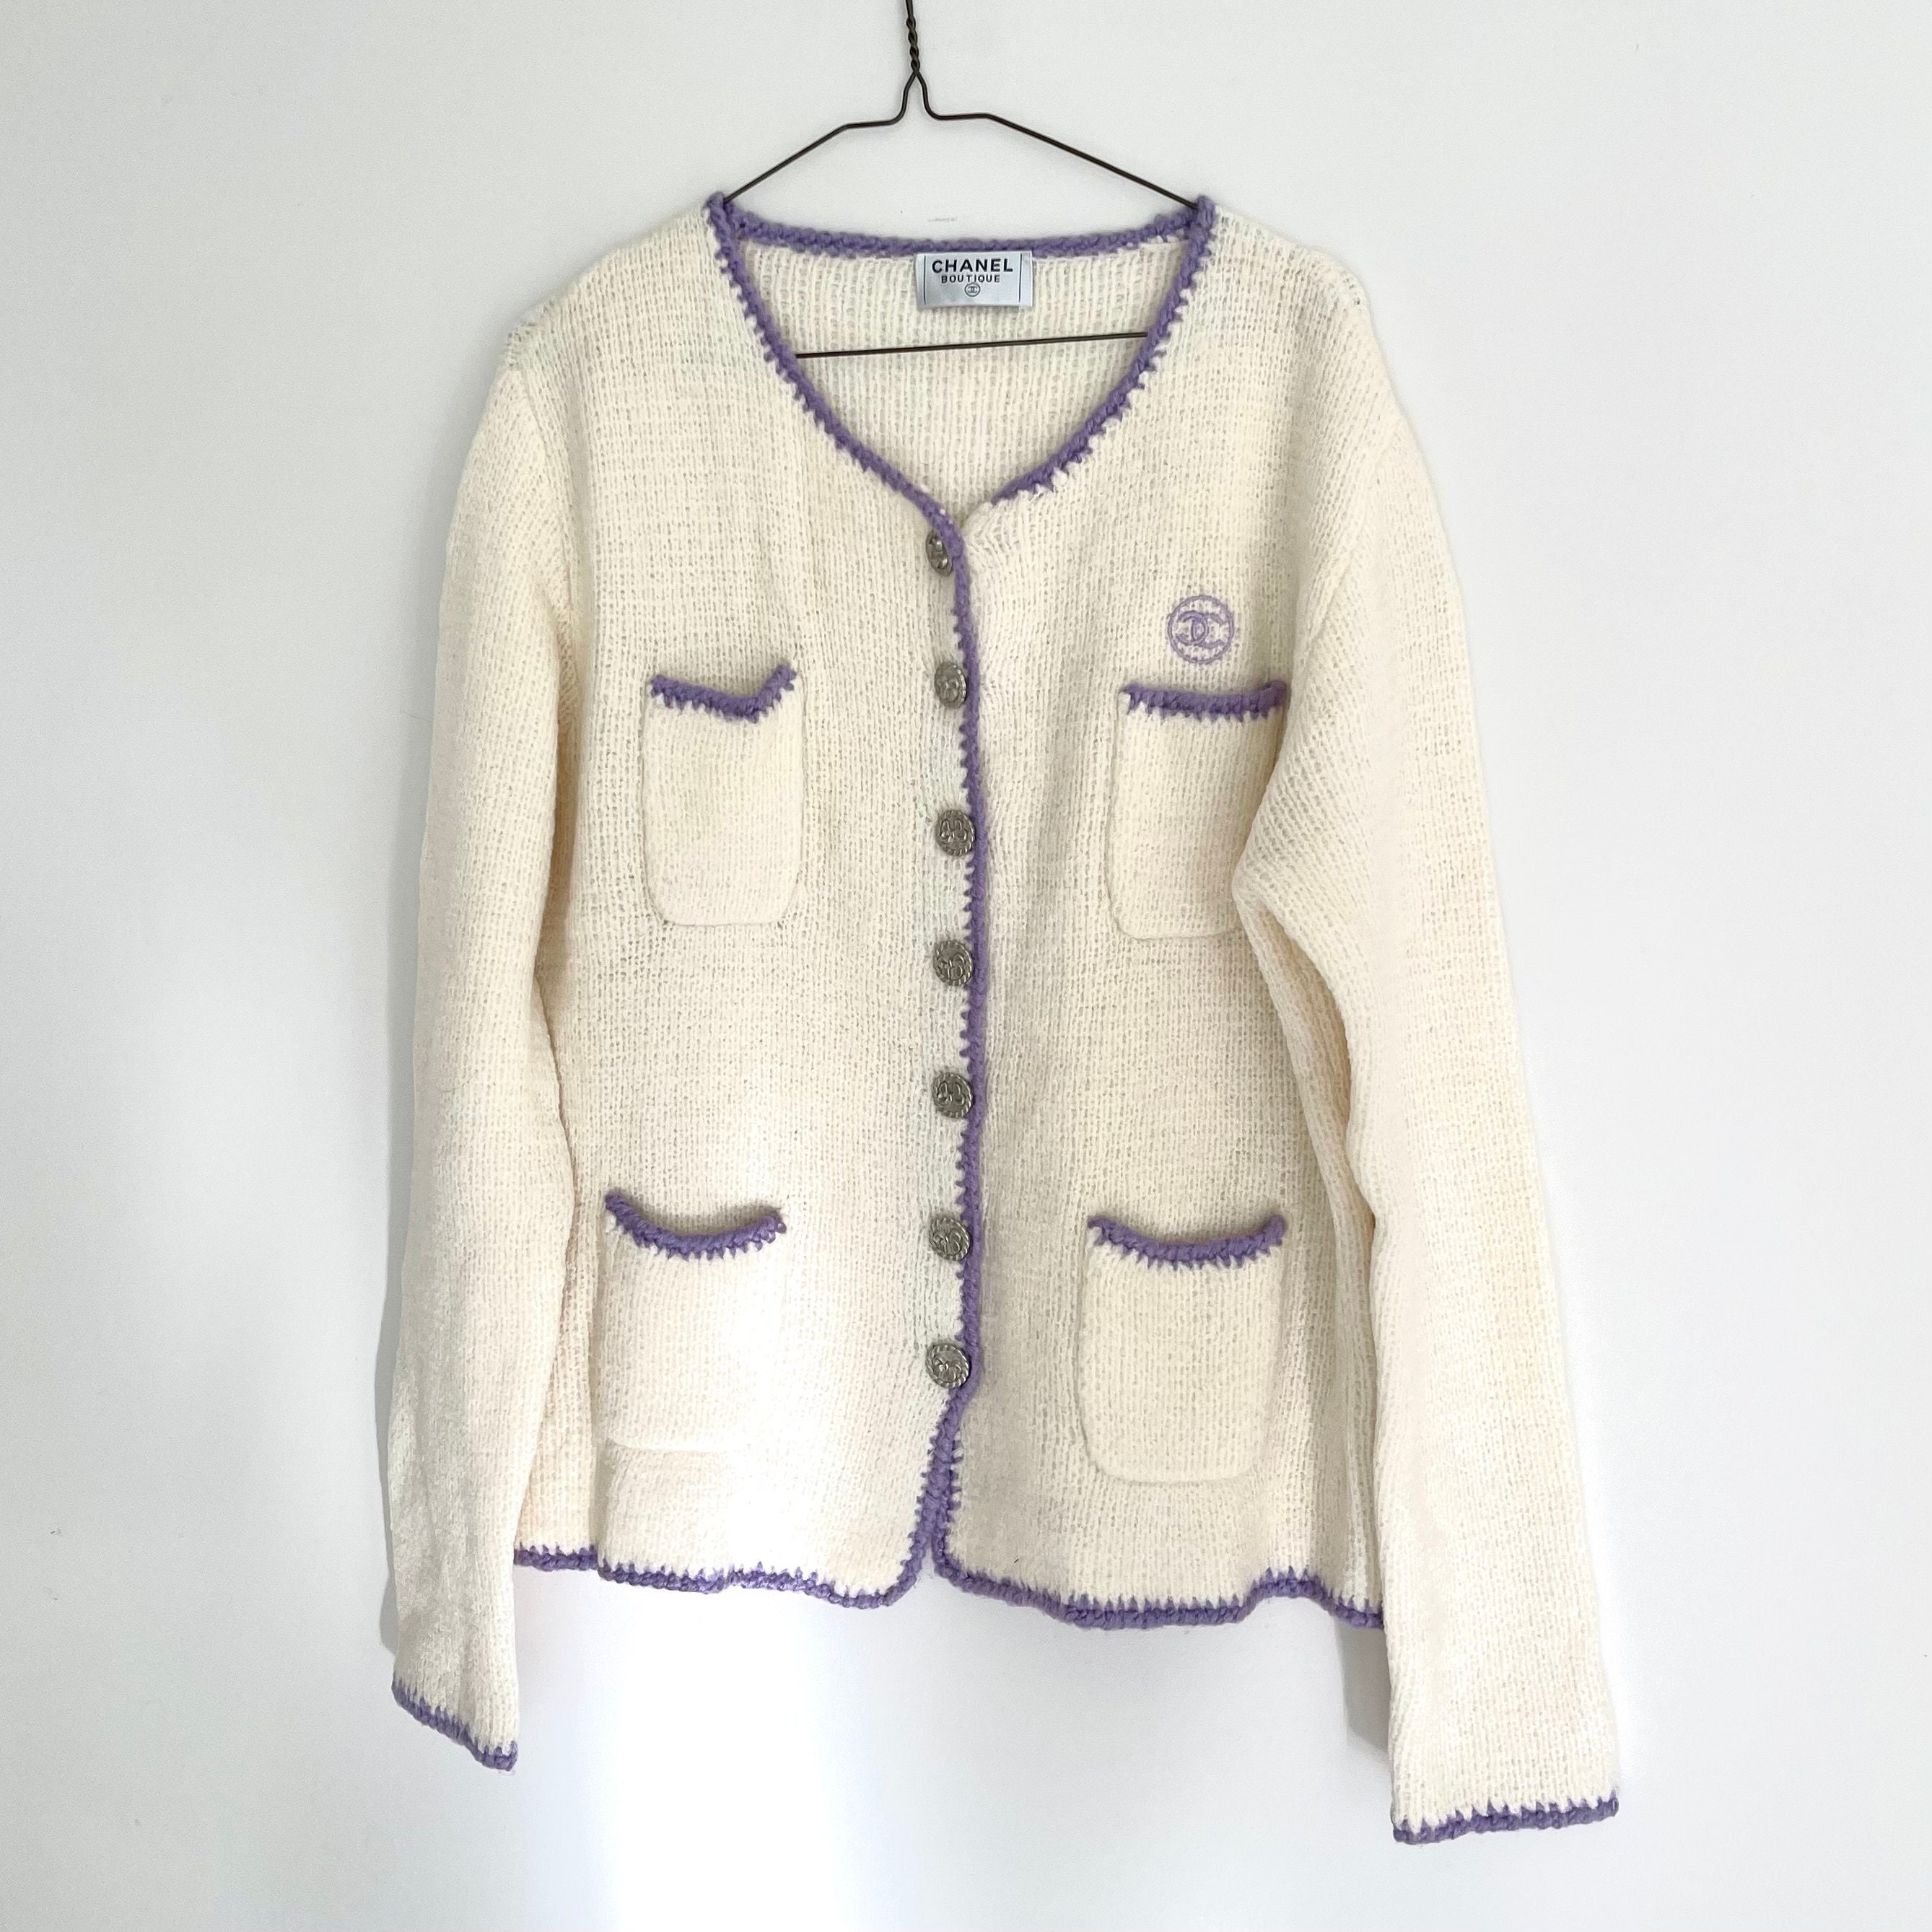 Chanel Tweed Military Collar Jacket Blue / White Cc Buttons Fr 40 / Us 8